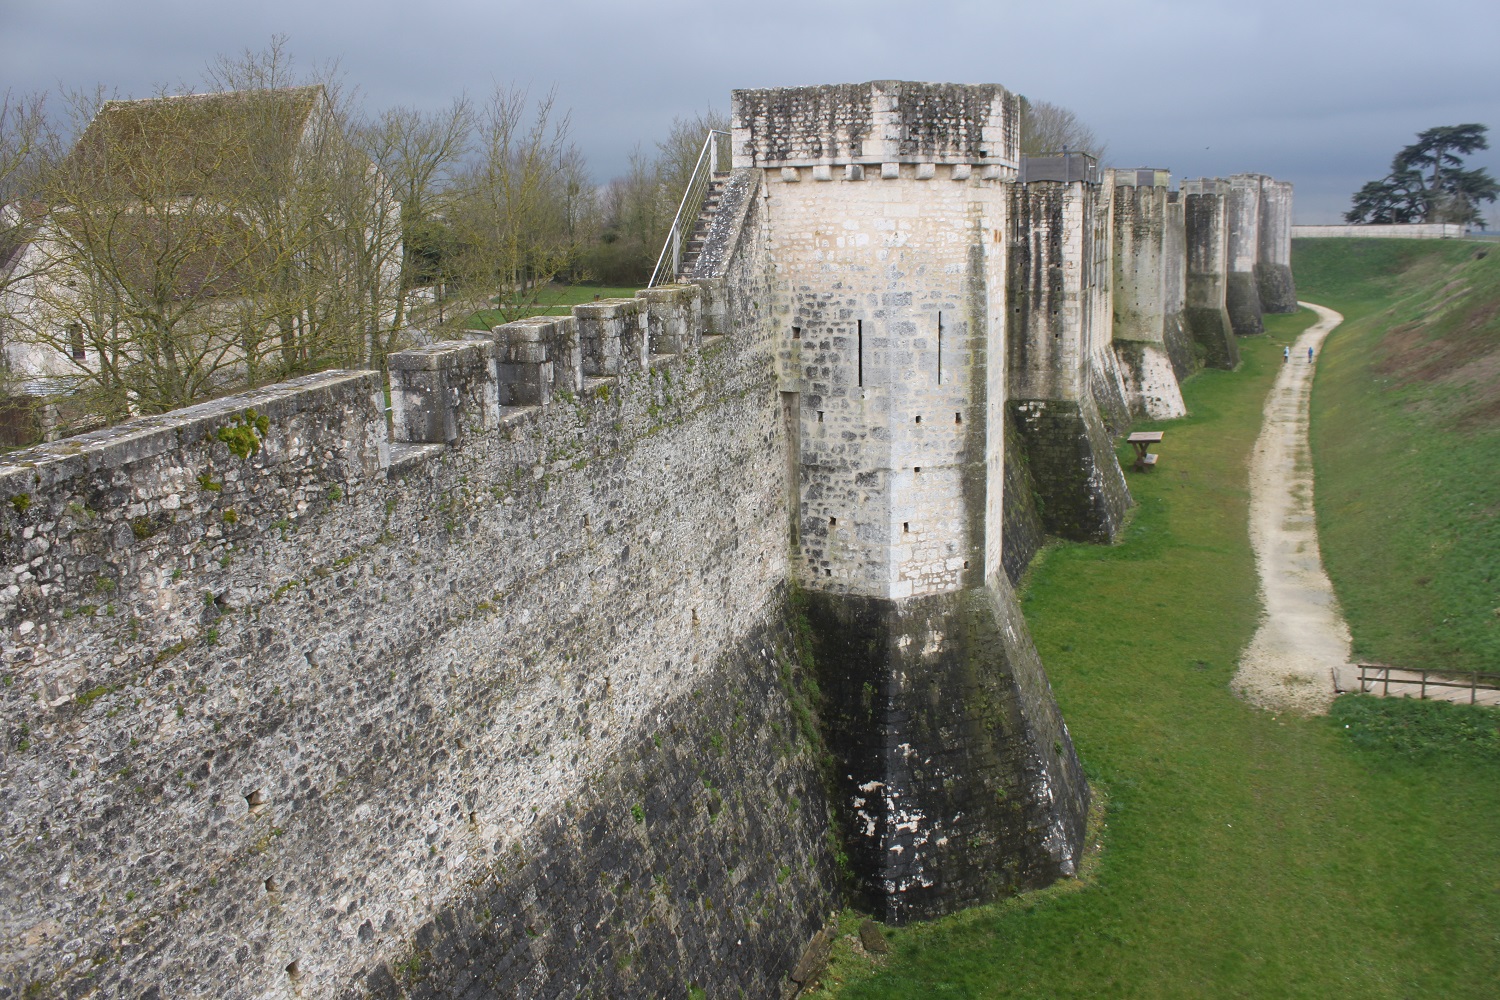 The medieval walls of Provins